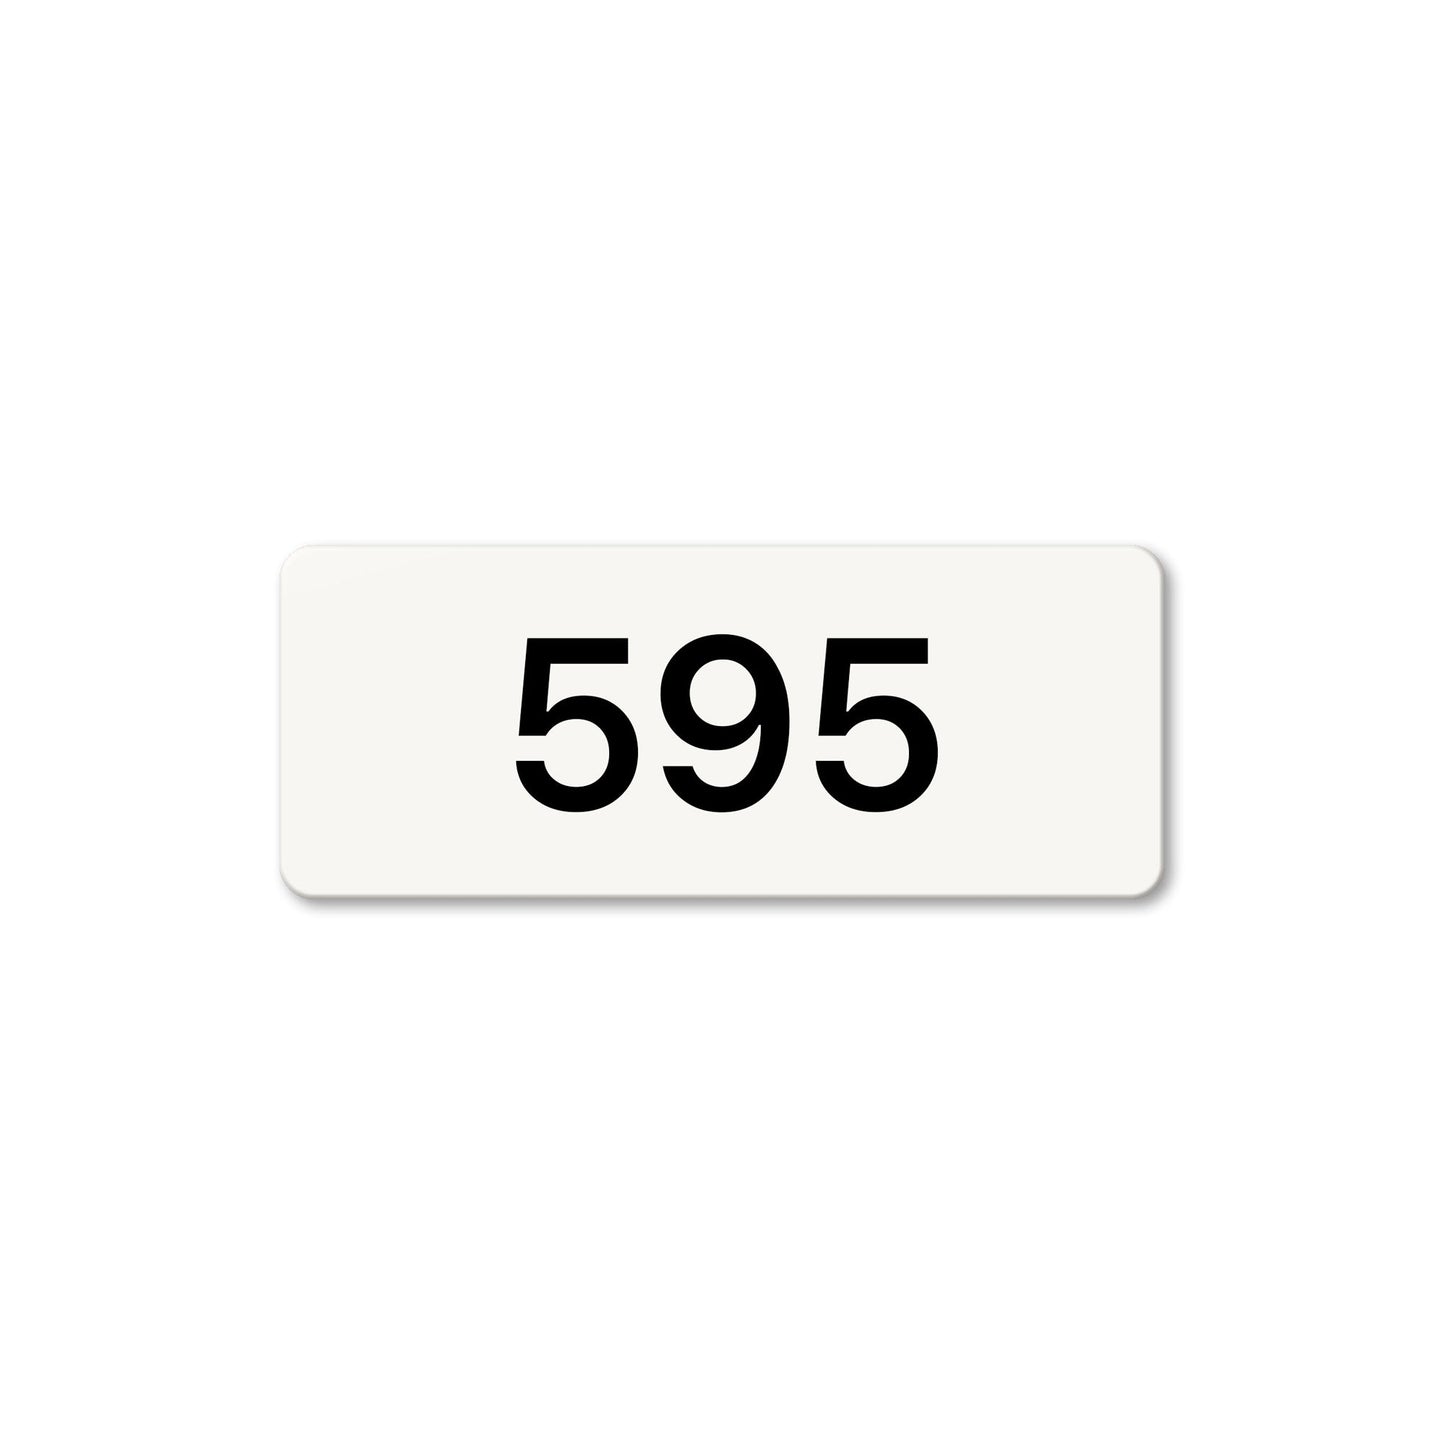 Numeral 595